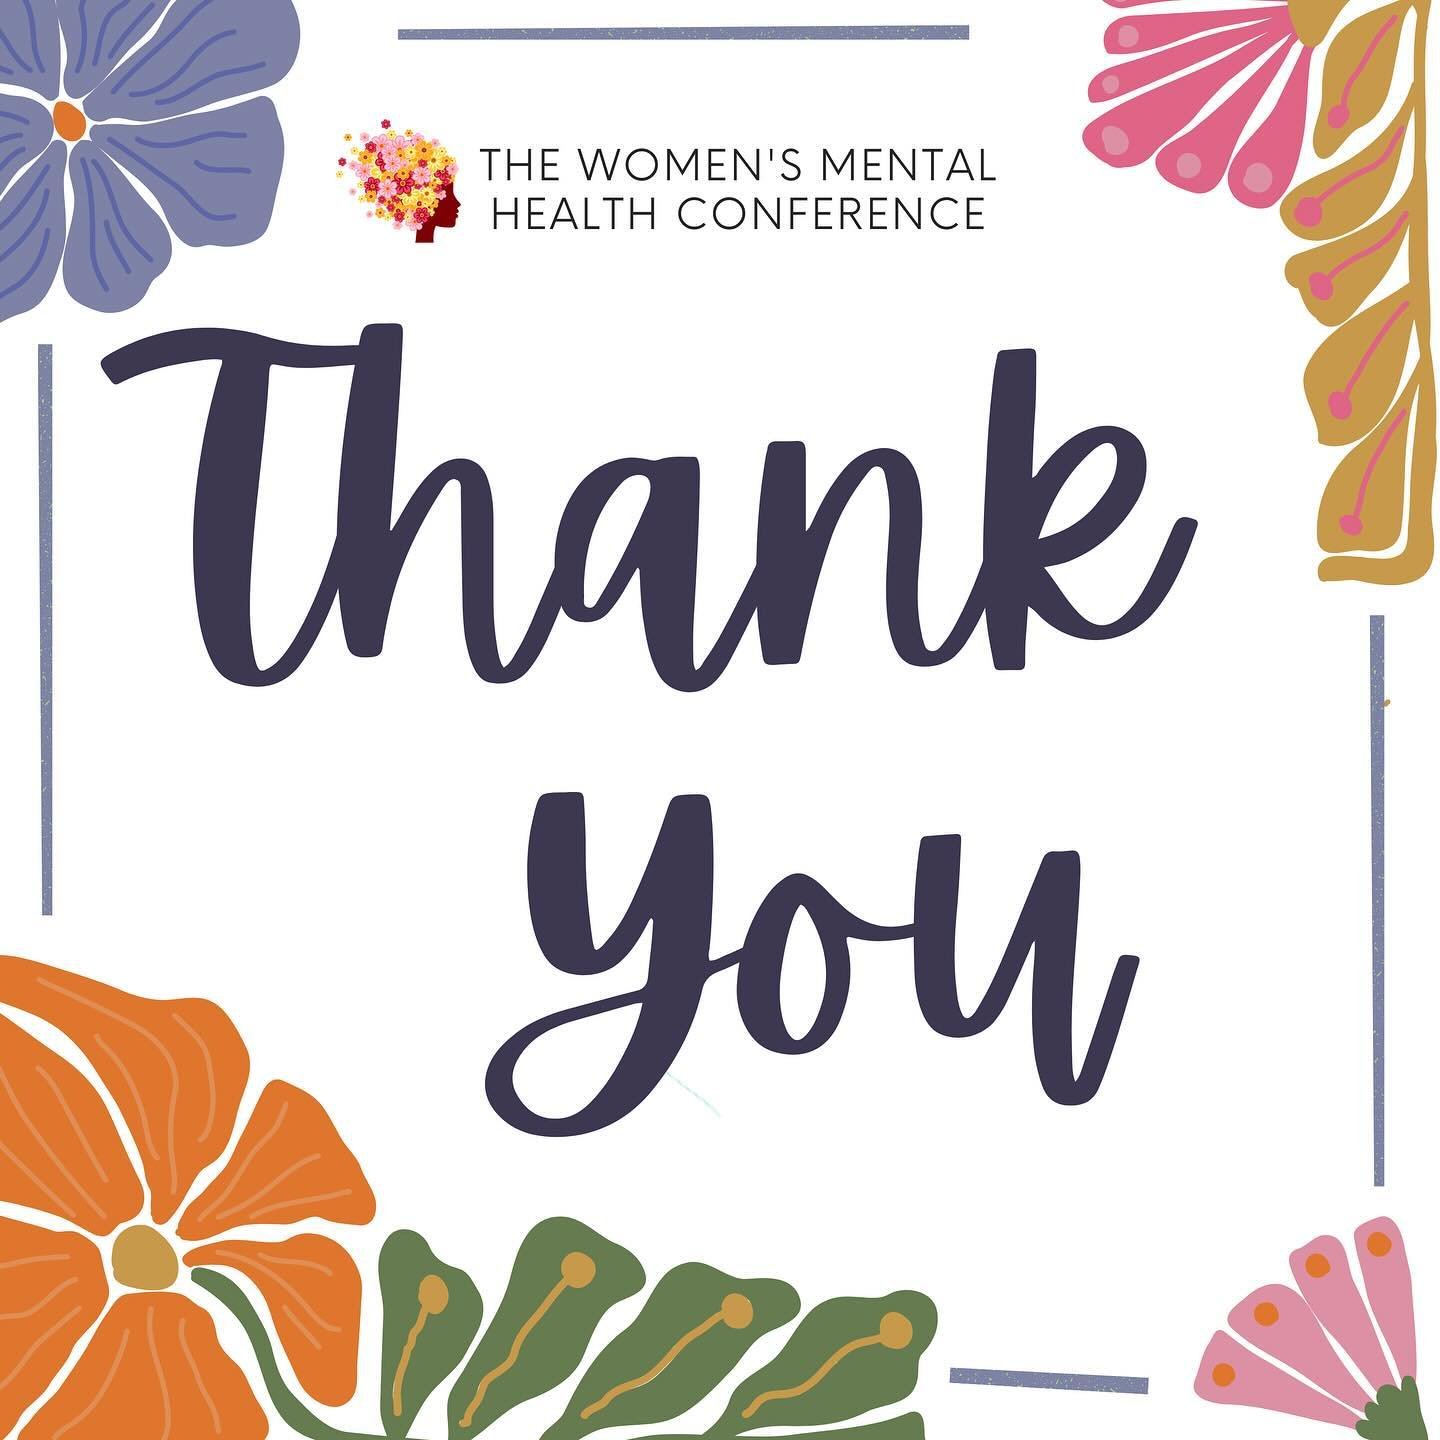 We are just in awe after today&rsquo;s conference. It is hard to put into words, but we hope you were touched and inspired after today&rsquo;s lineup. We hope you felt seen, heard, and supported. We hope you walked away with information and skills th